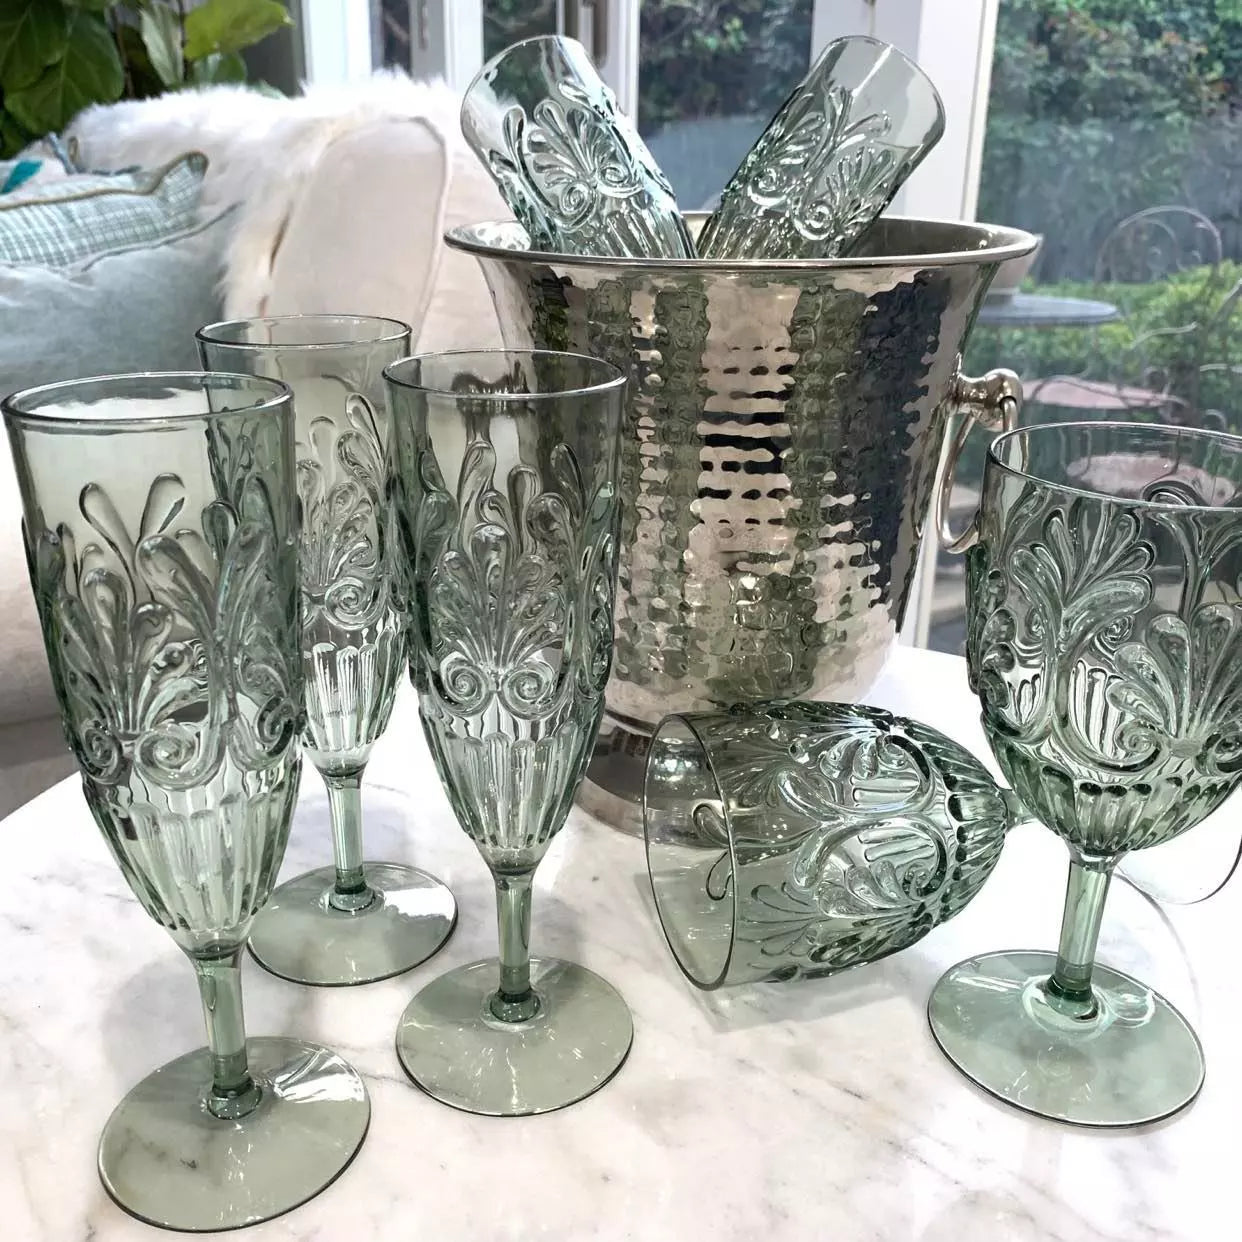 A set of Flemington Acrylic Champagne Flute - Sage Green wine glasses by Indigo Love on a table.